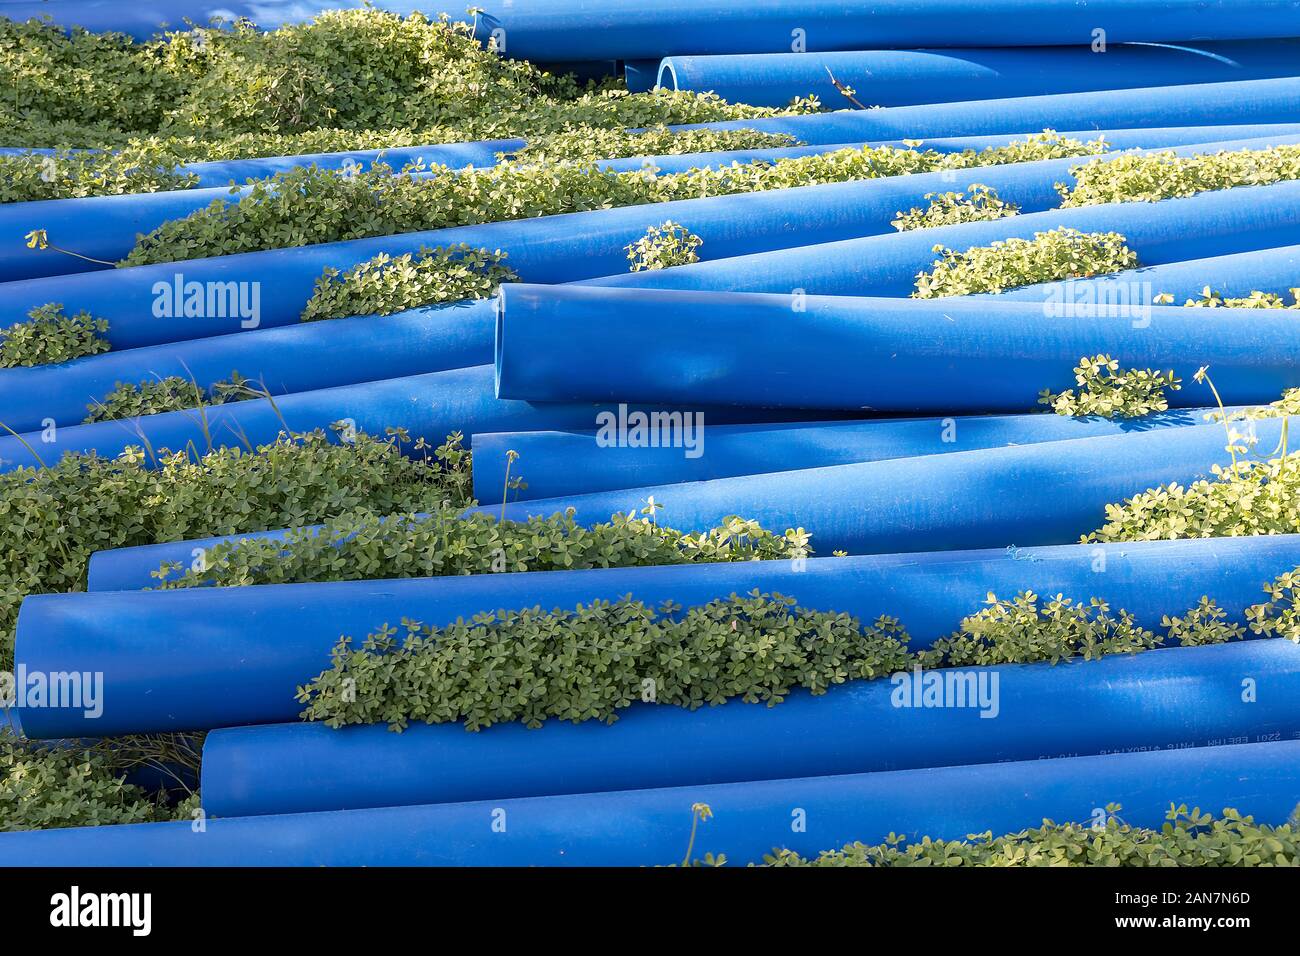 Water Pipes lying on a field of clover. Stock Image Stock Photo